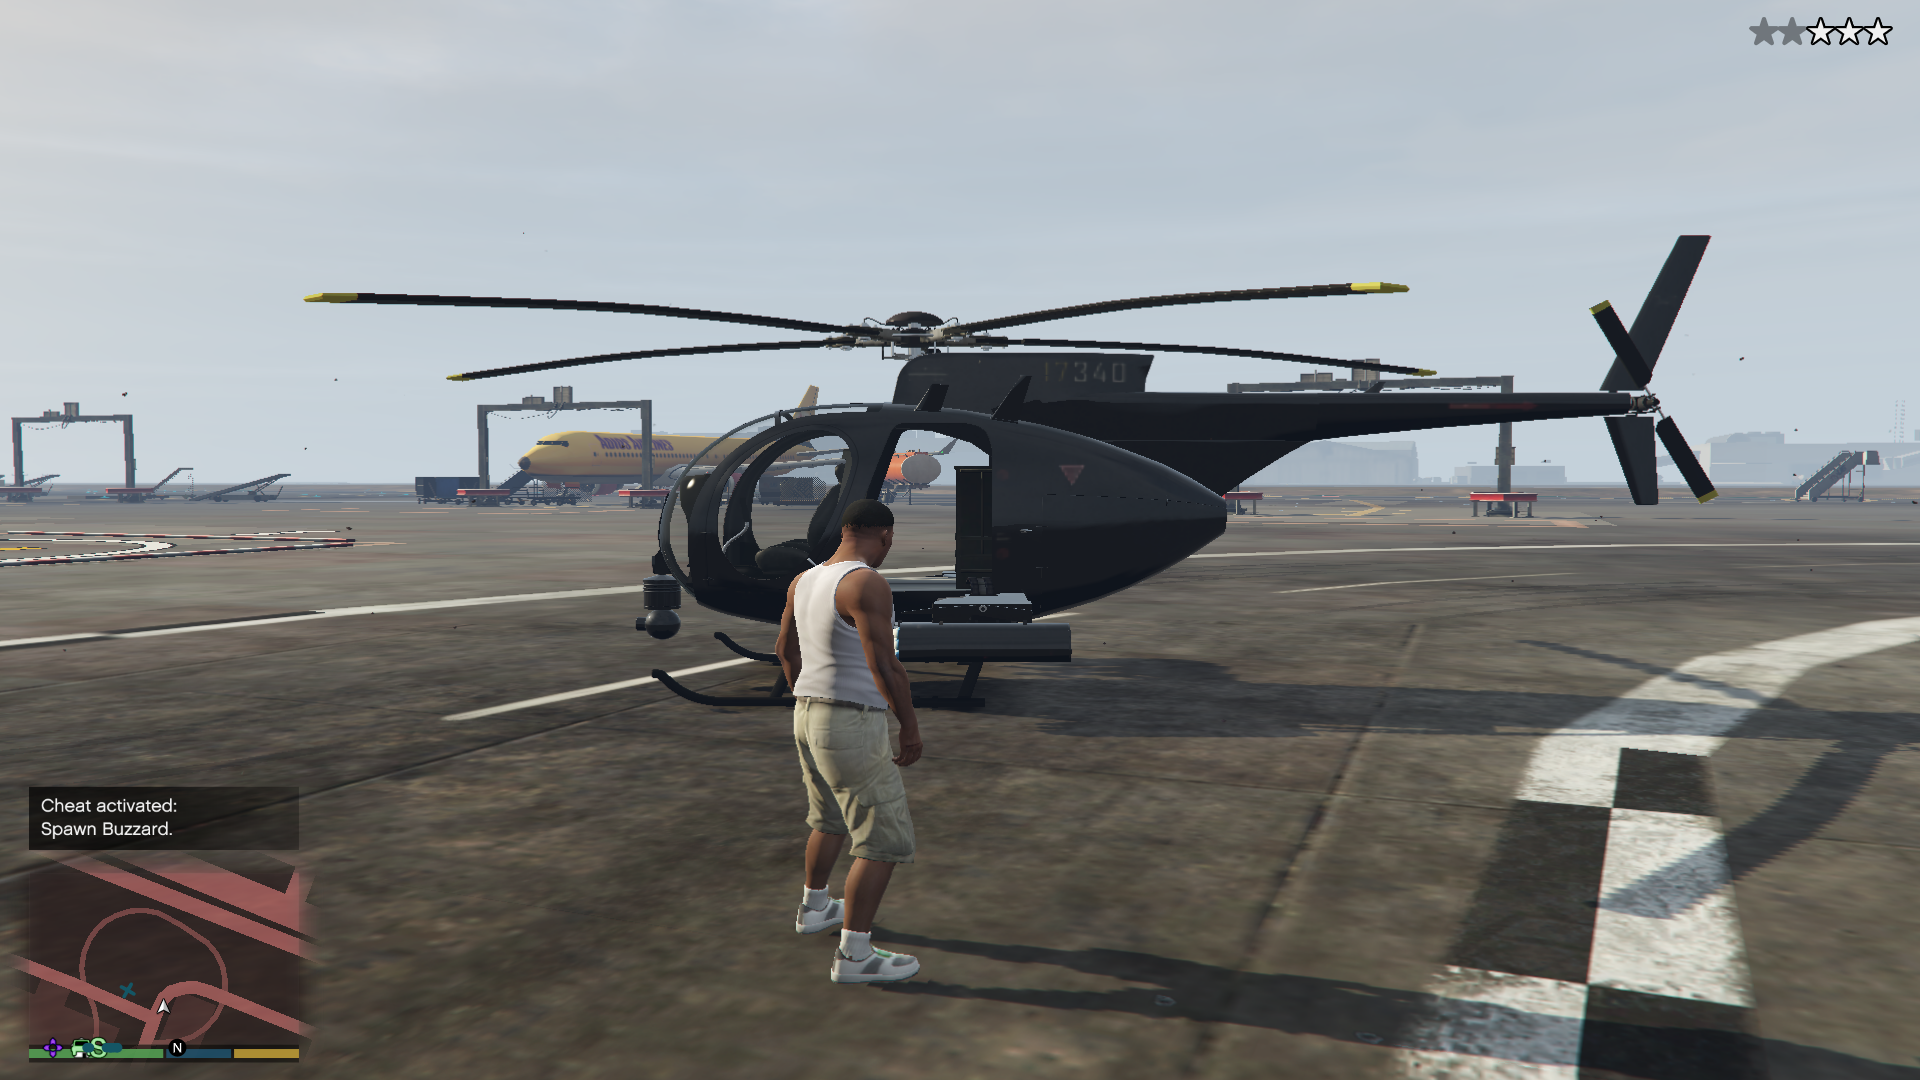 A screenshot from Grand Theft Auto 5, showing the character Franklin standing in front of a helicopter.